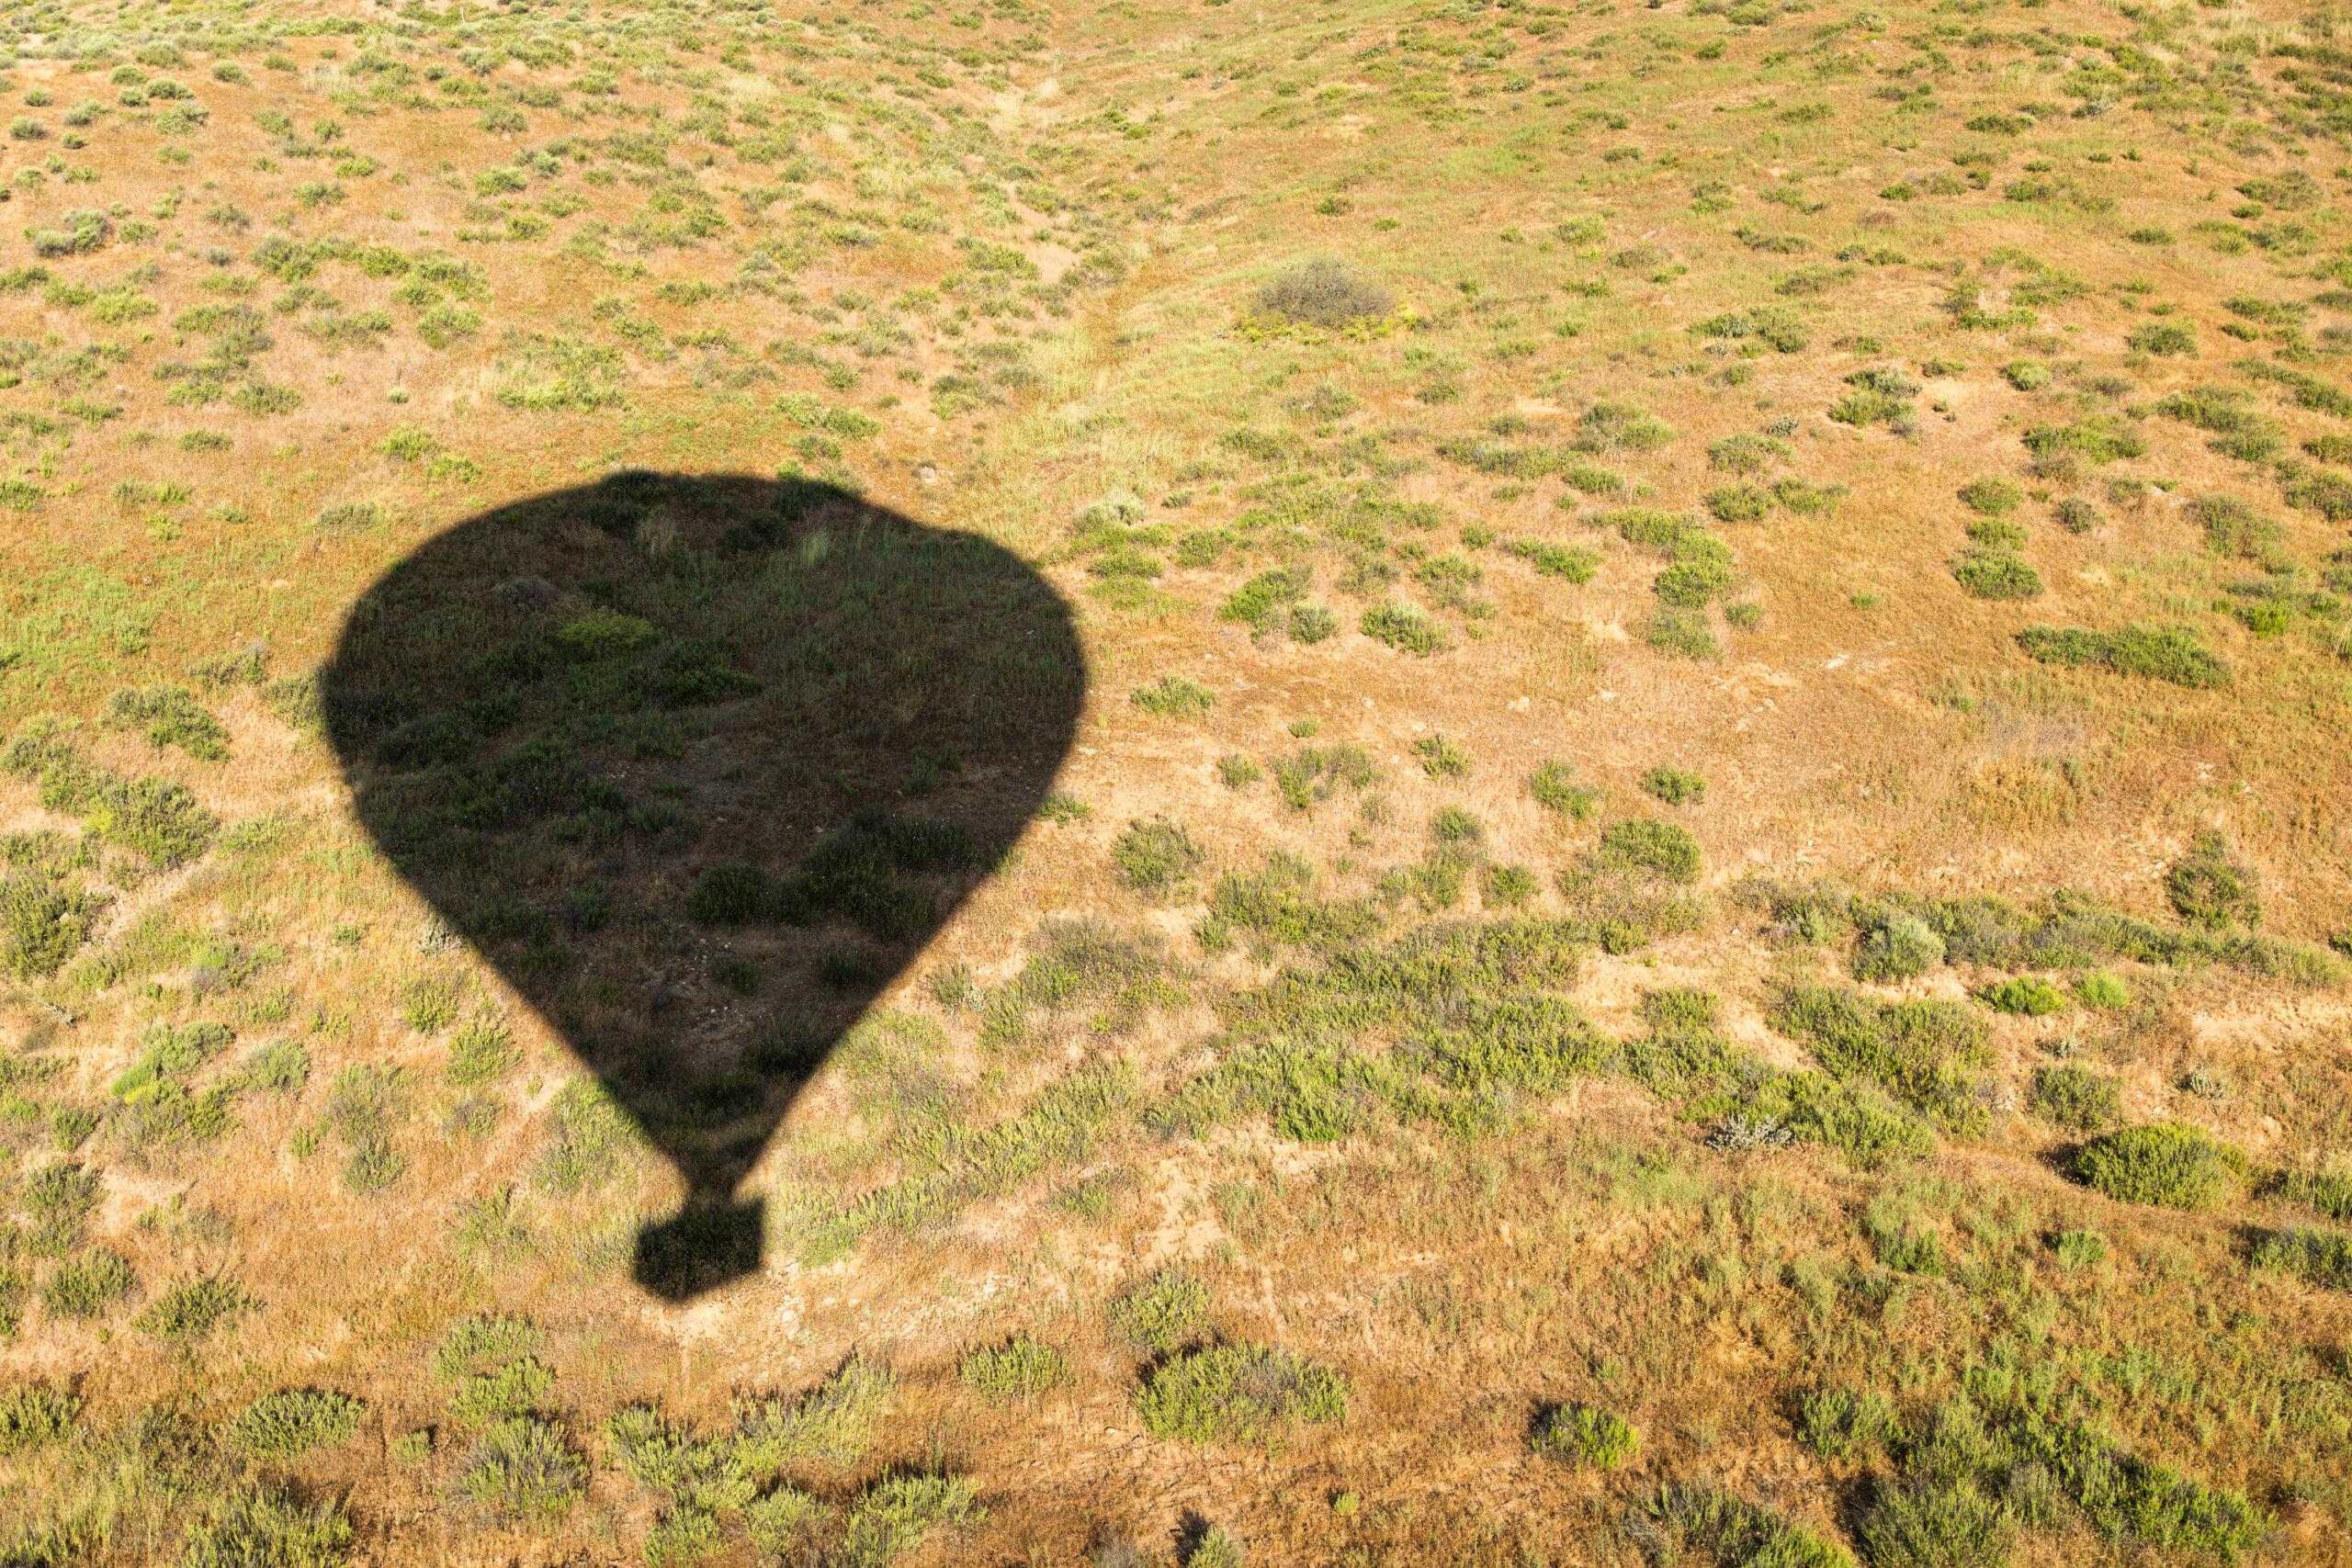 The shadow of our balloon over a vacant field in Southern California